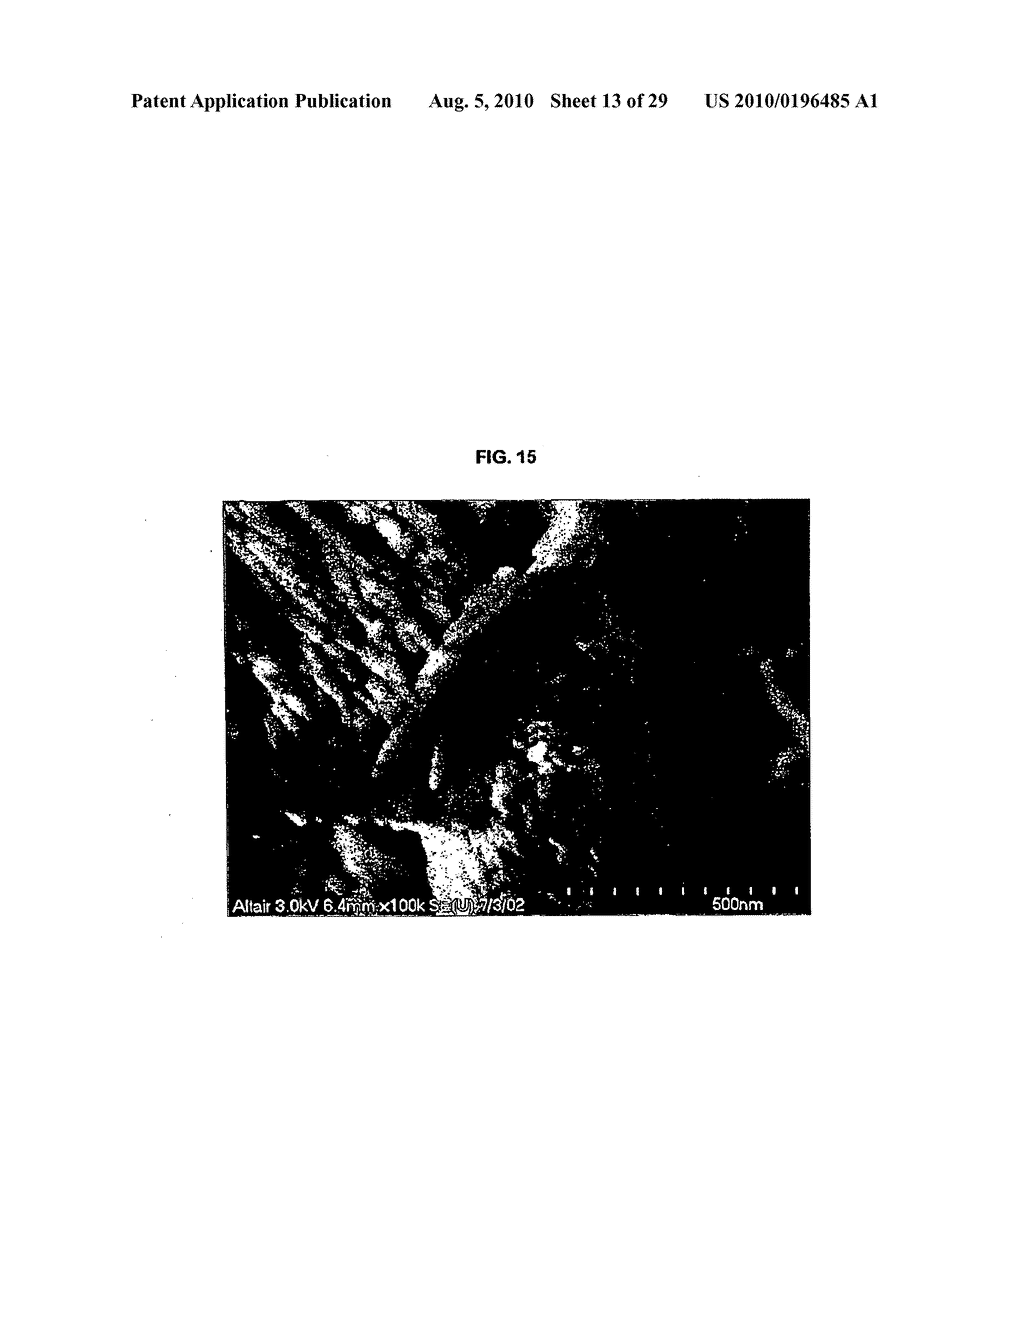 RARE EARTH METAL COMPOUNDS, METHODS OF MAKING, AND METHODS OF USING THE SAME - diagram, schematic, and image 14